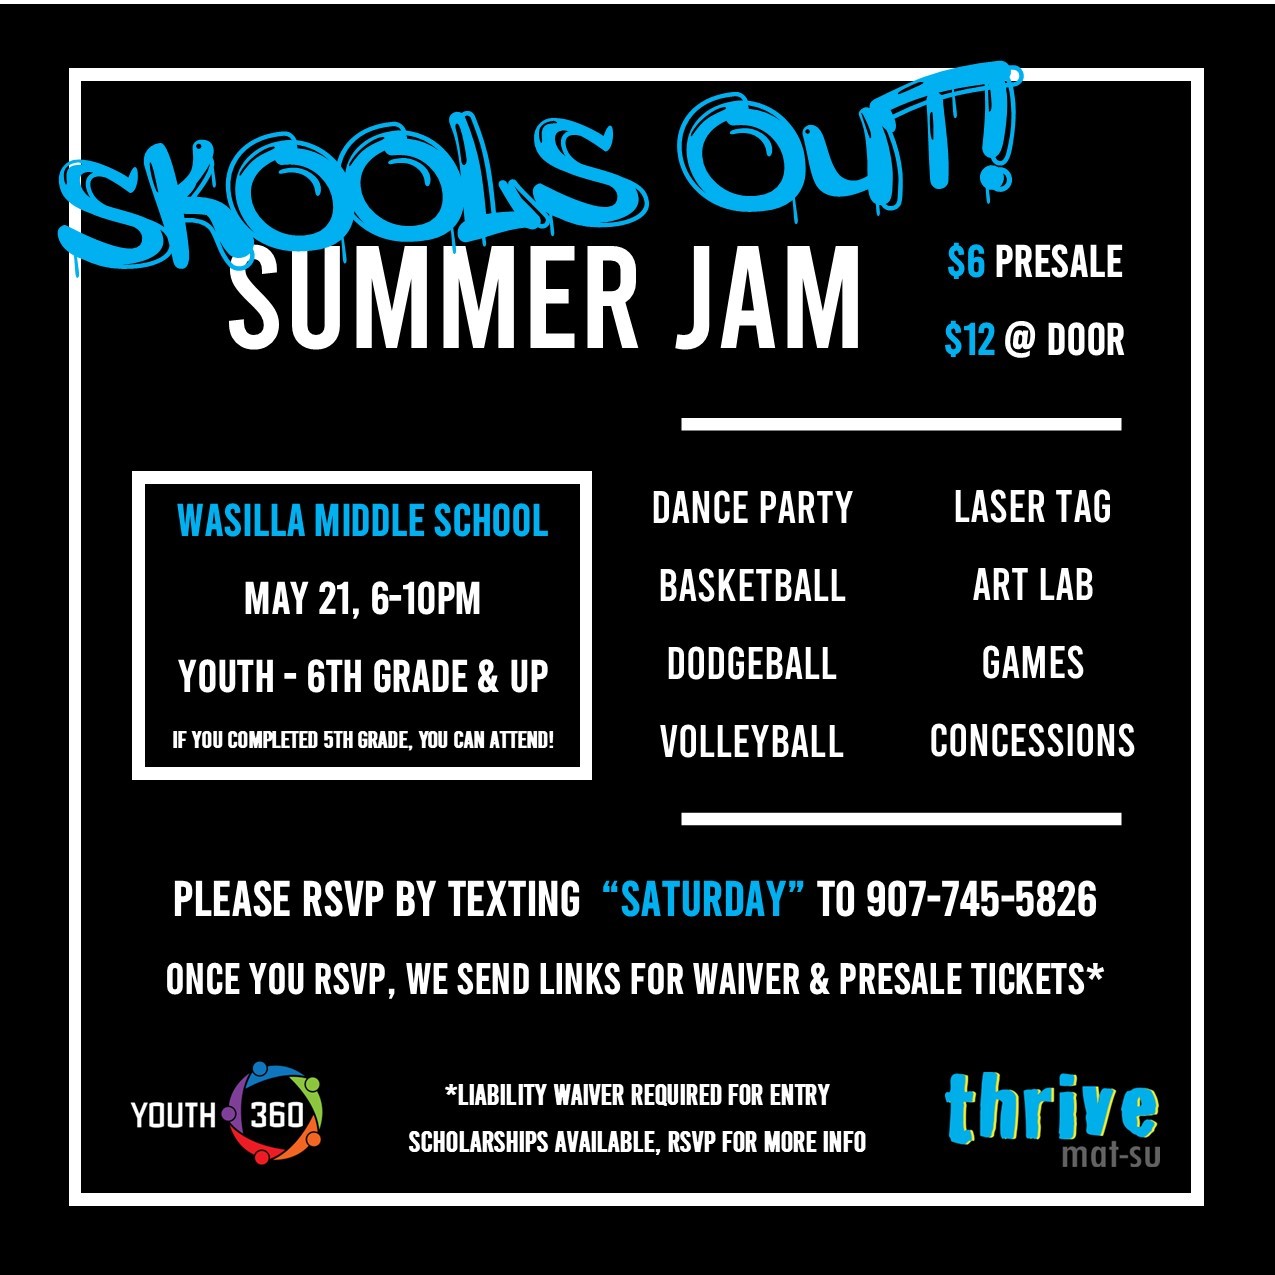 Schools Out Summer Jam